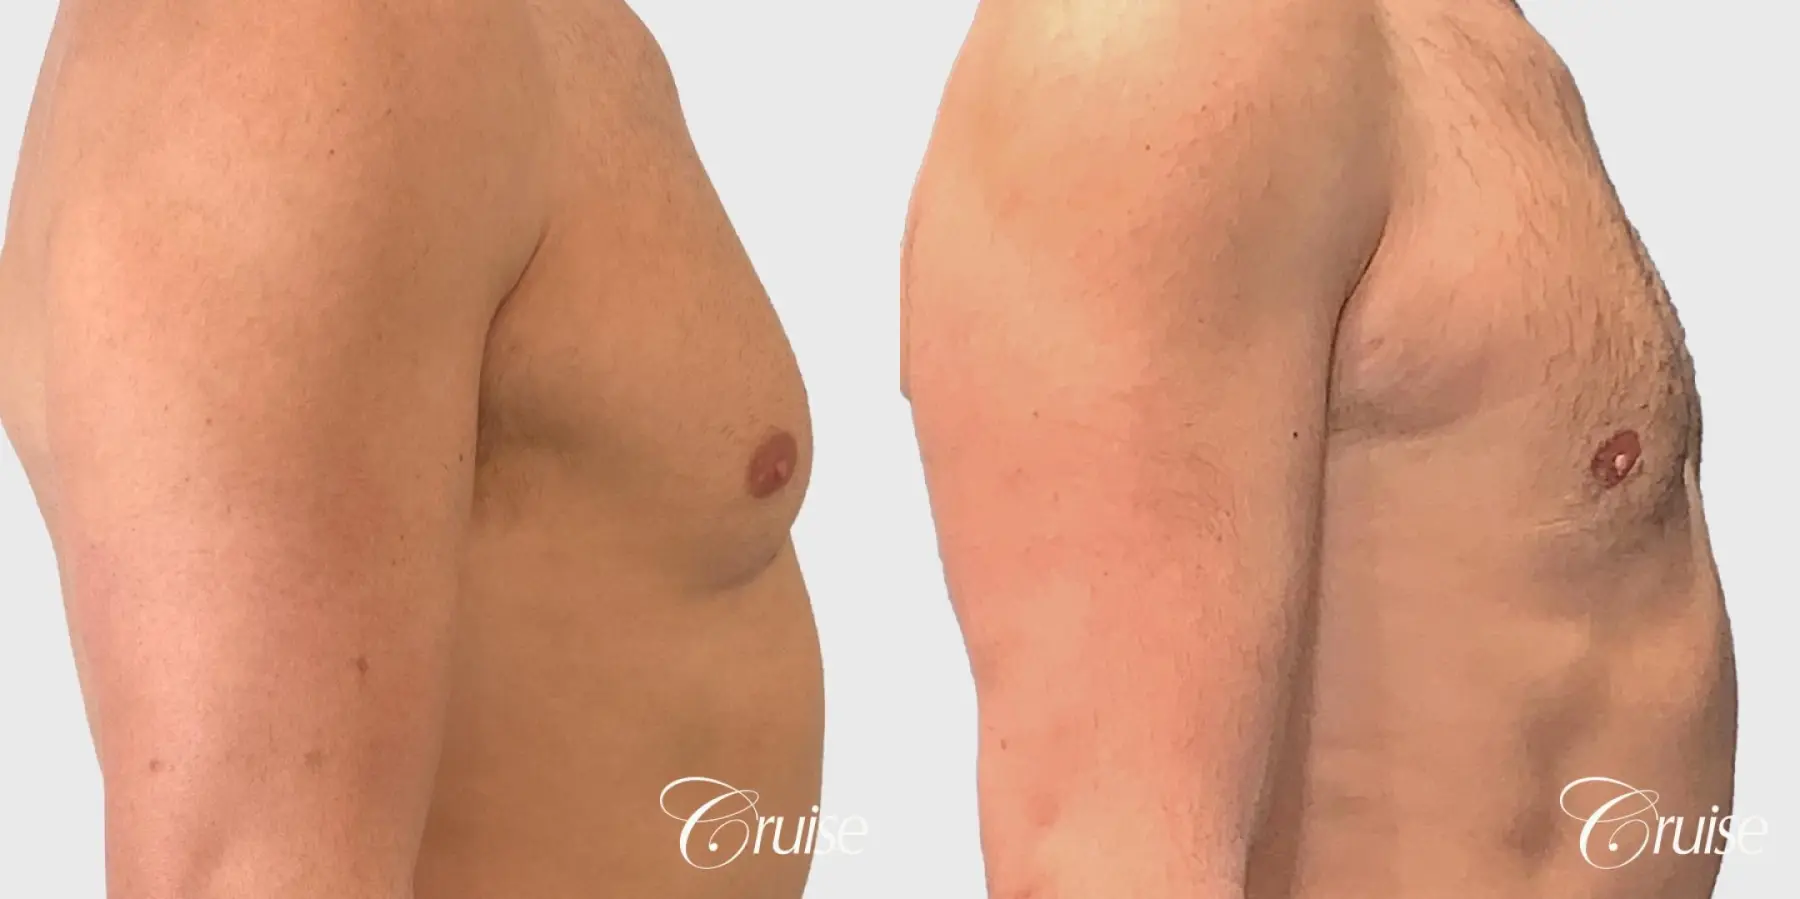 Gynecomastia Removal - Before and After 3